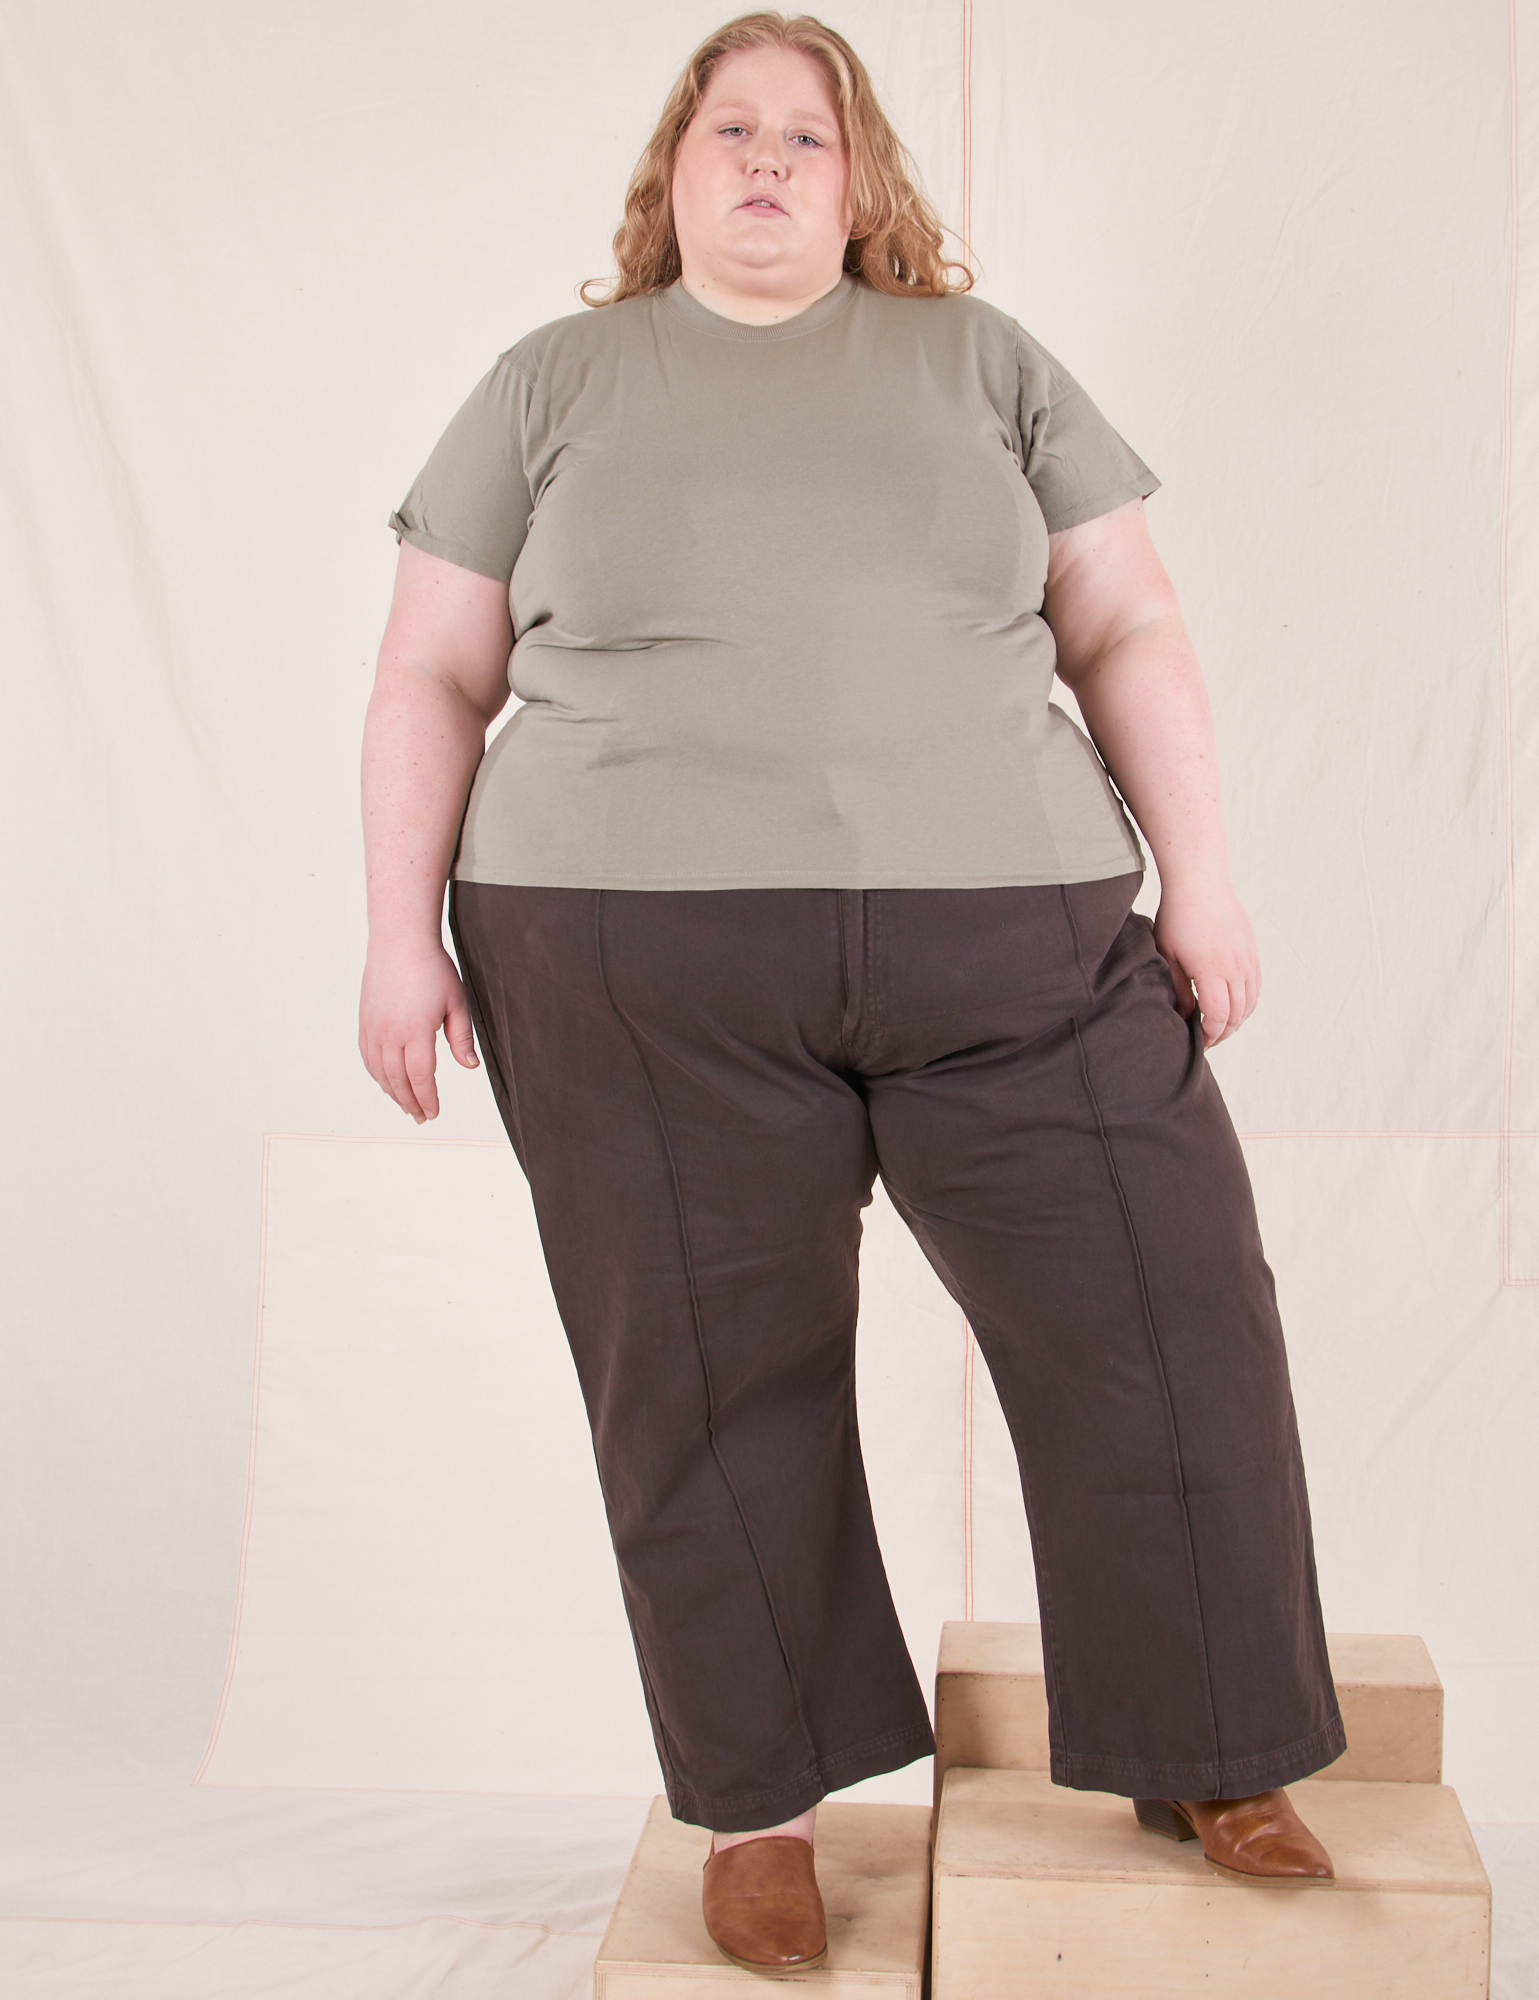 Catie is wearing 3XL Organic Vintage Tee in Khaki Grey paired with espresso brown Western Pants